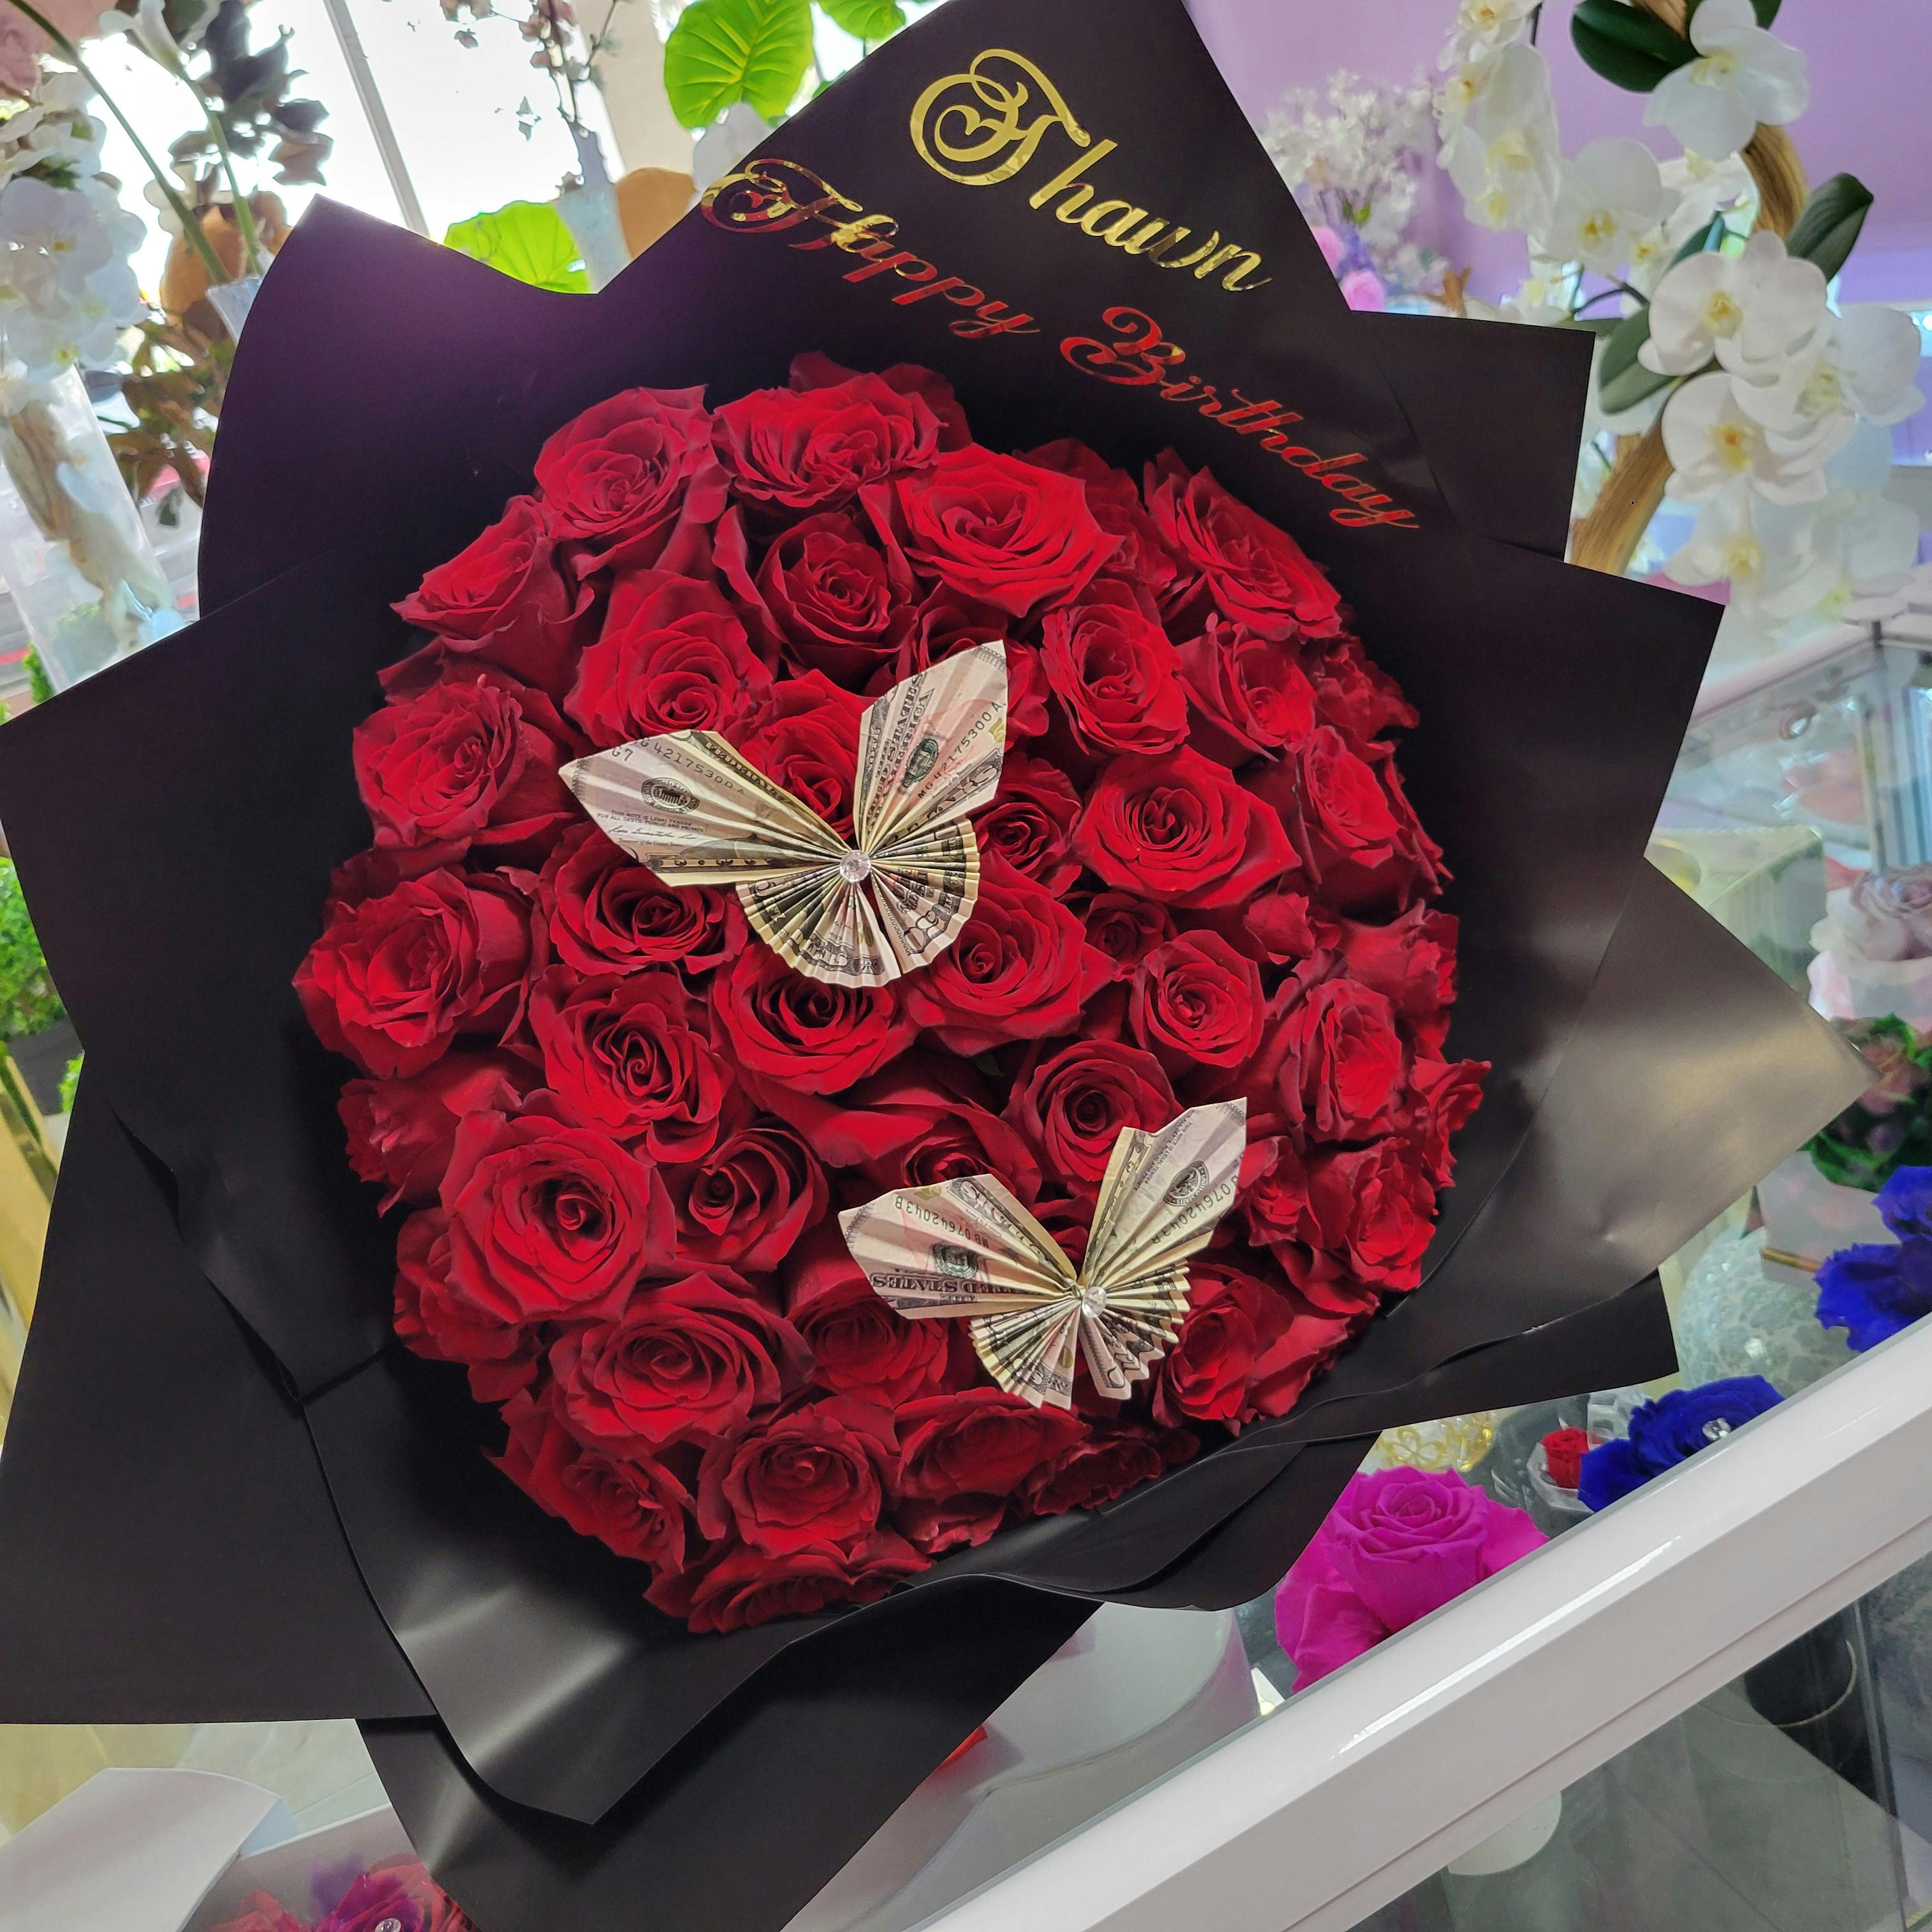 Bouquet of Roses & butterflies from real money .